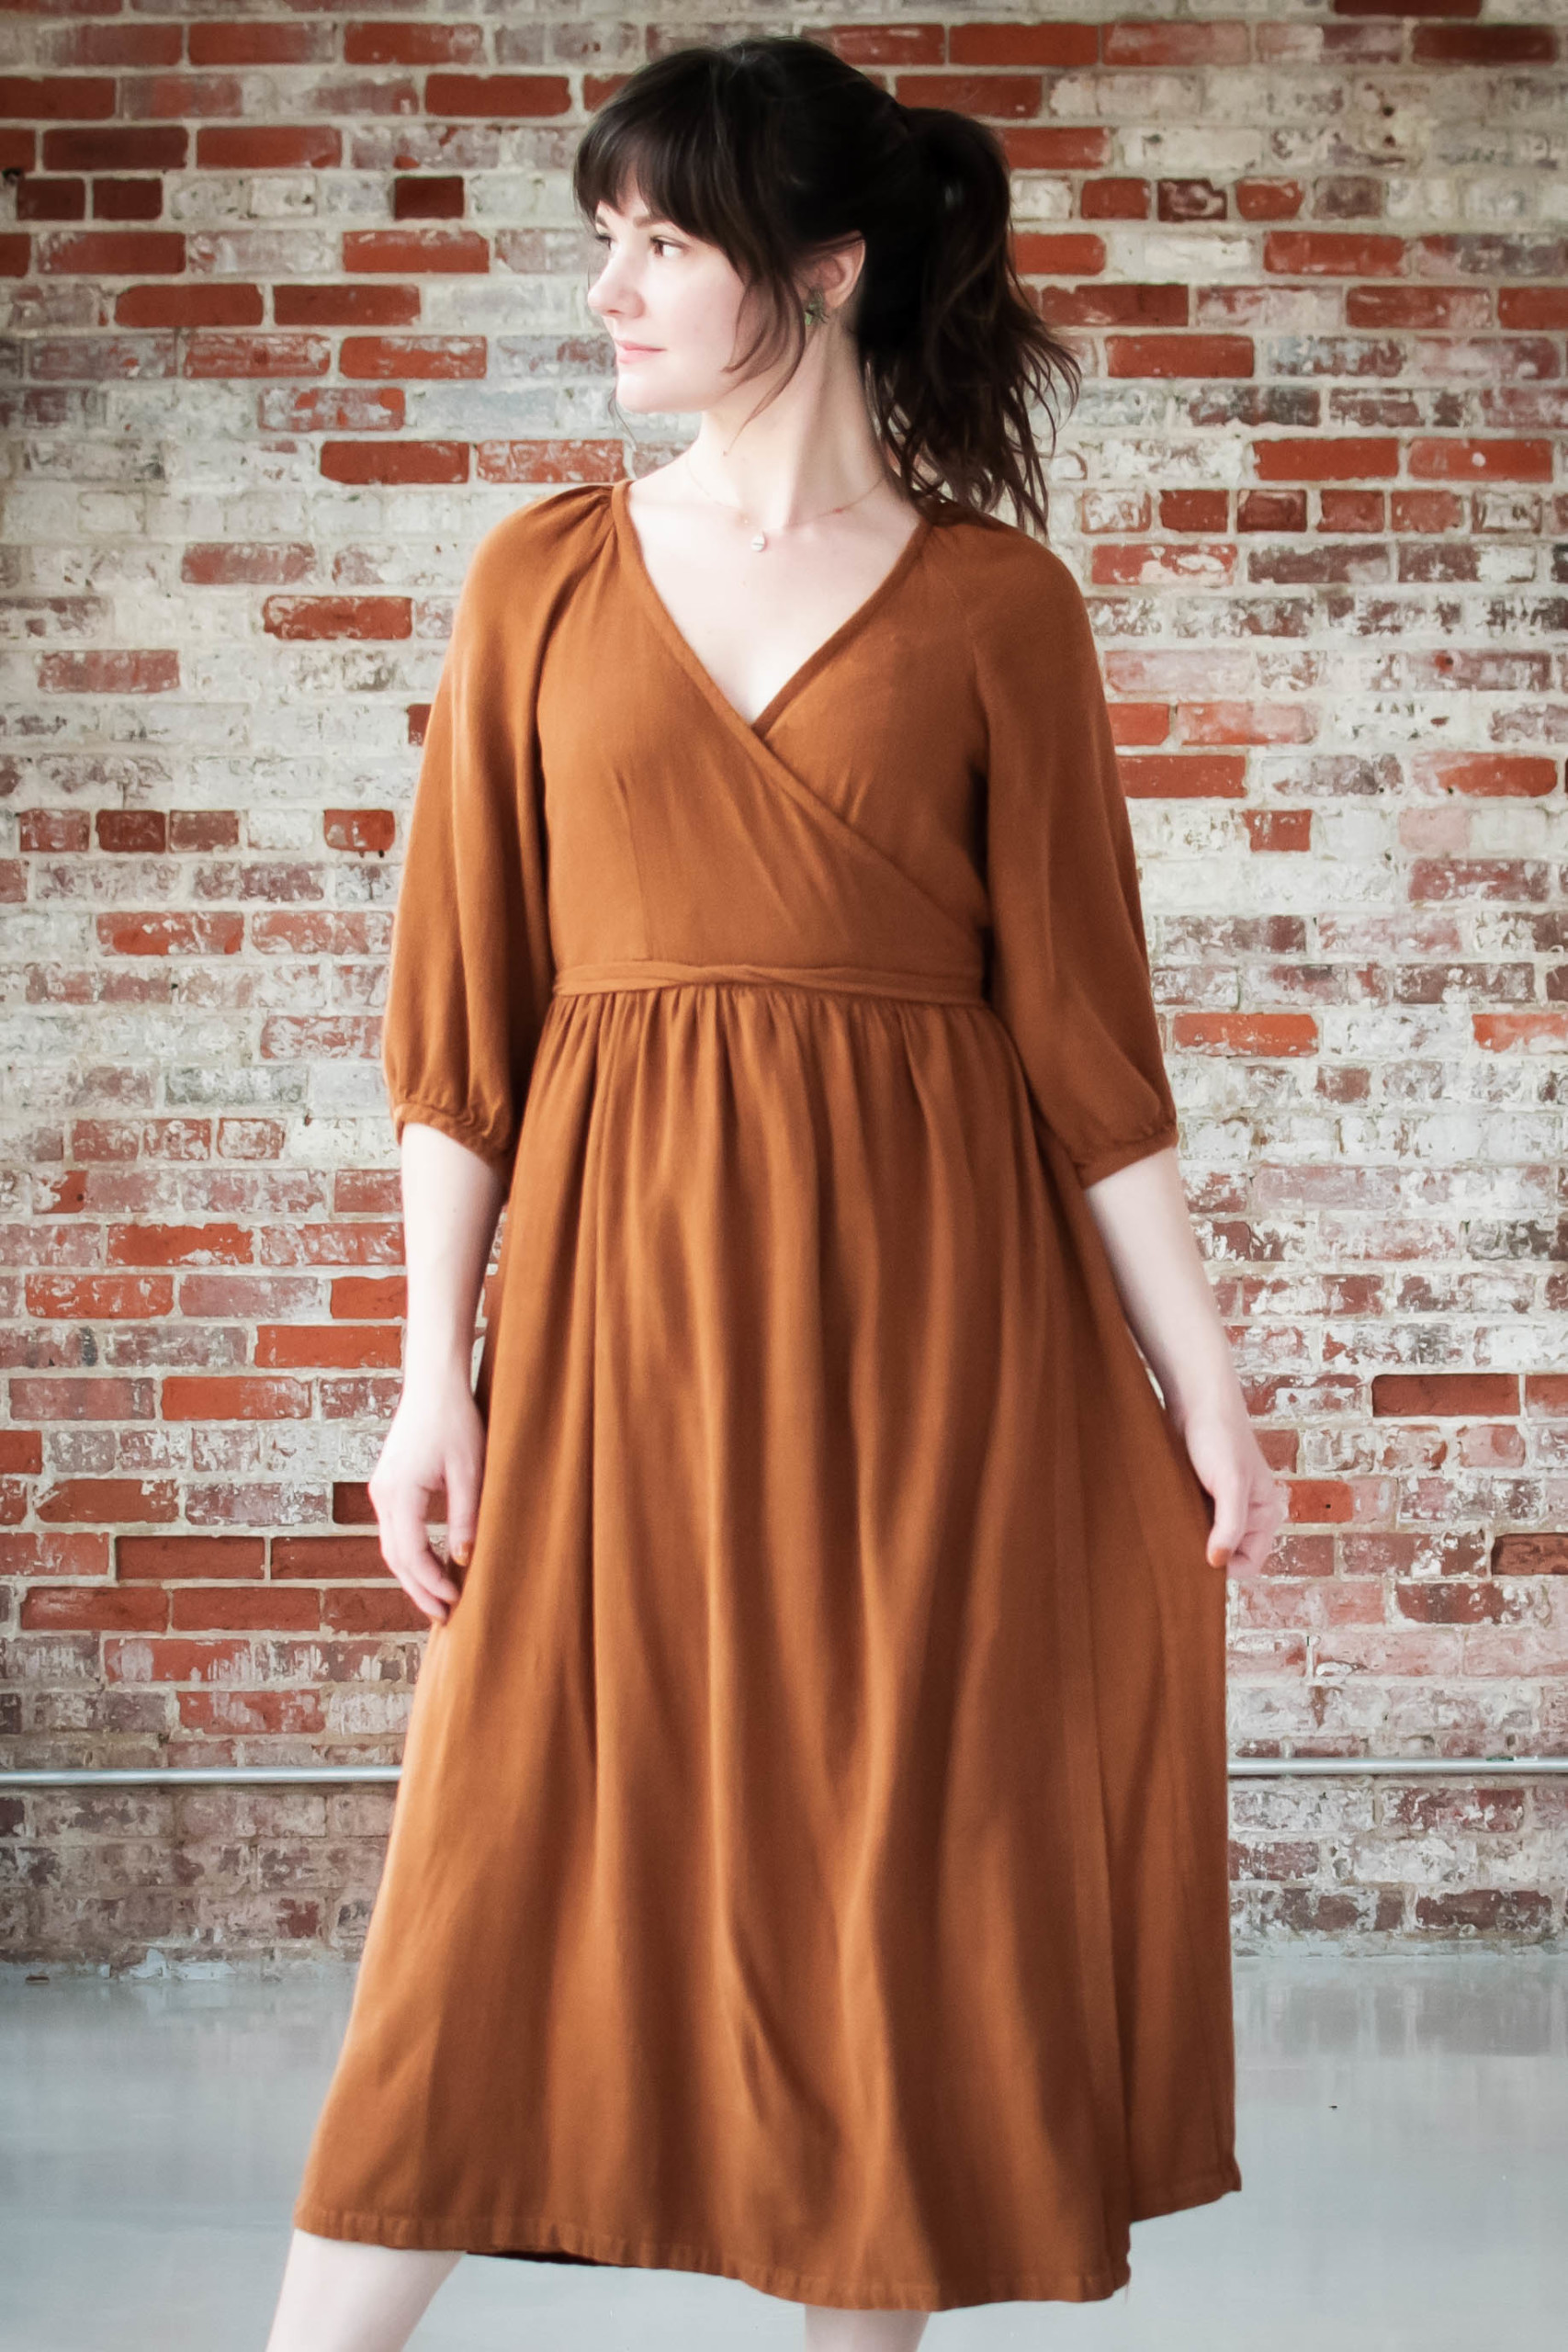 Meredith wearing the wrap-front Hinterland Dress hack